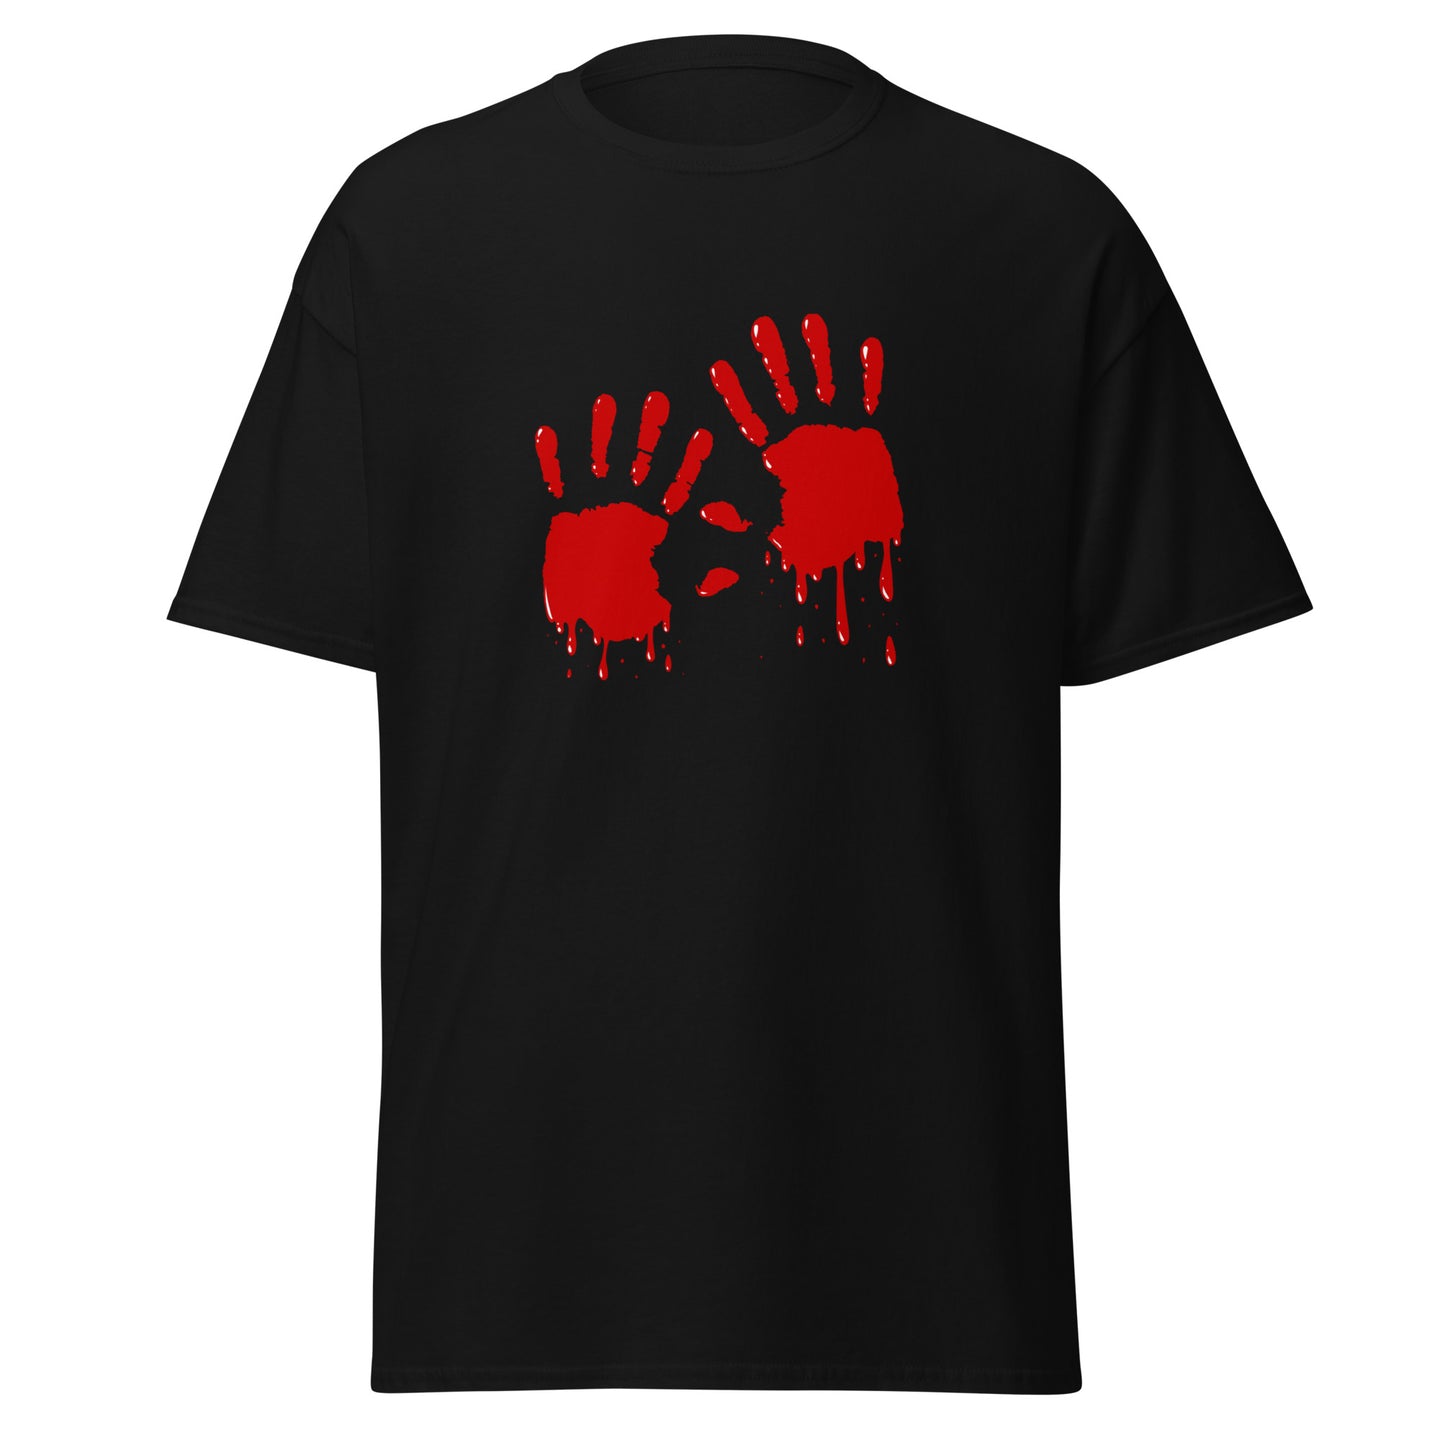 Handblood Graphic Tee - Premium Black T-Shirt for Gamers & Twitch Streamers